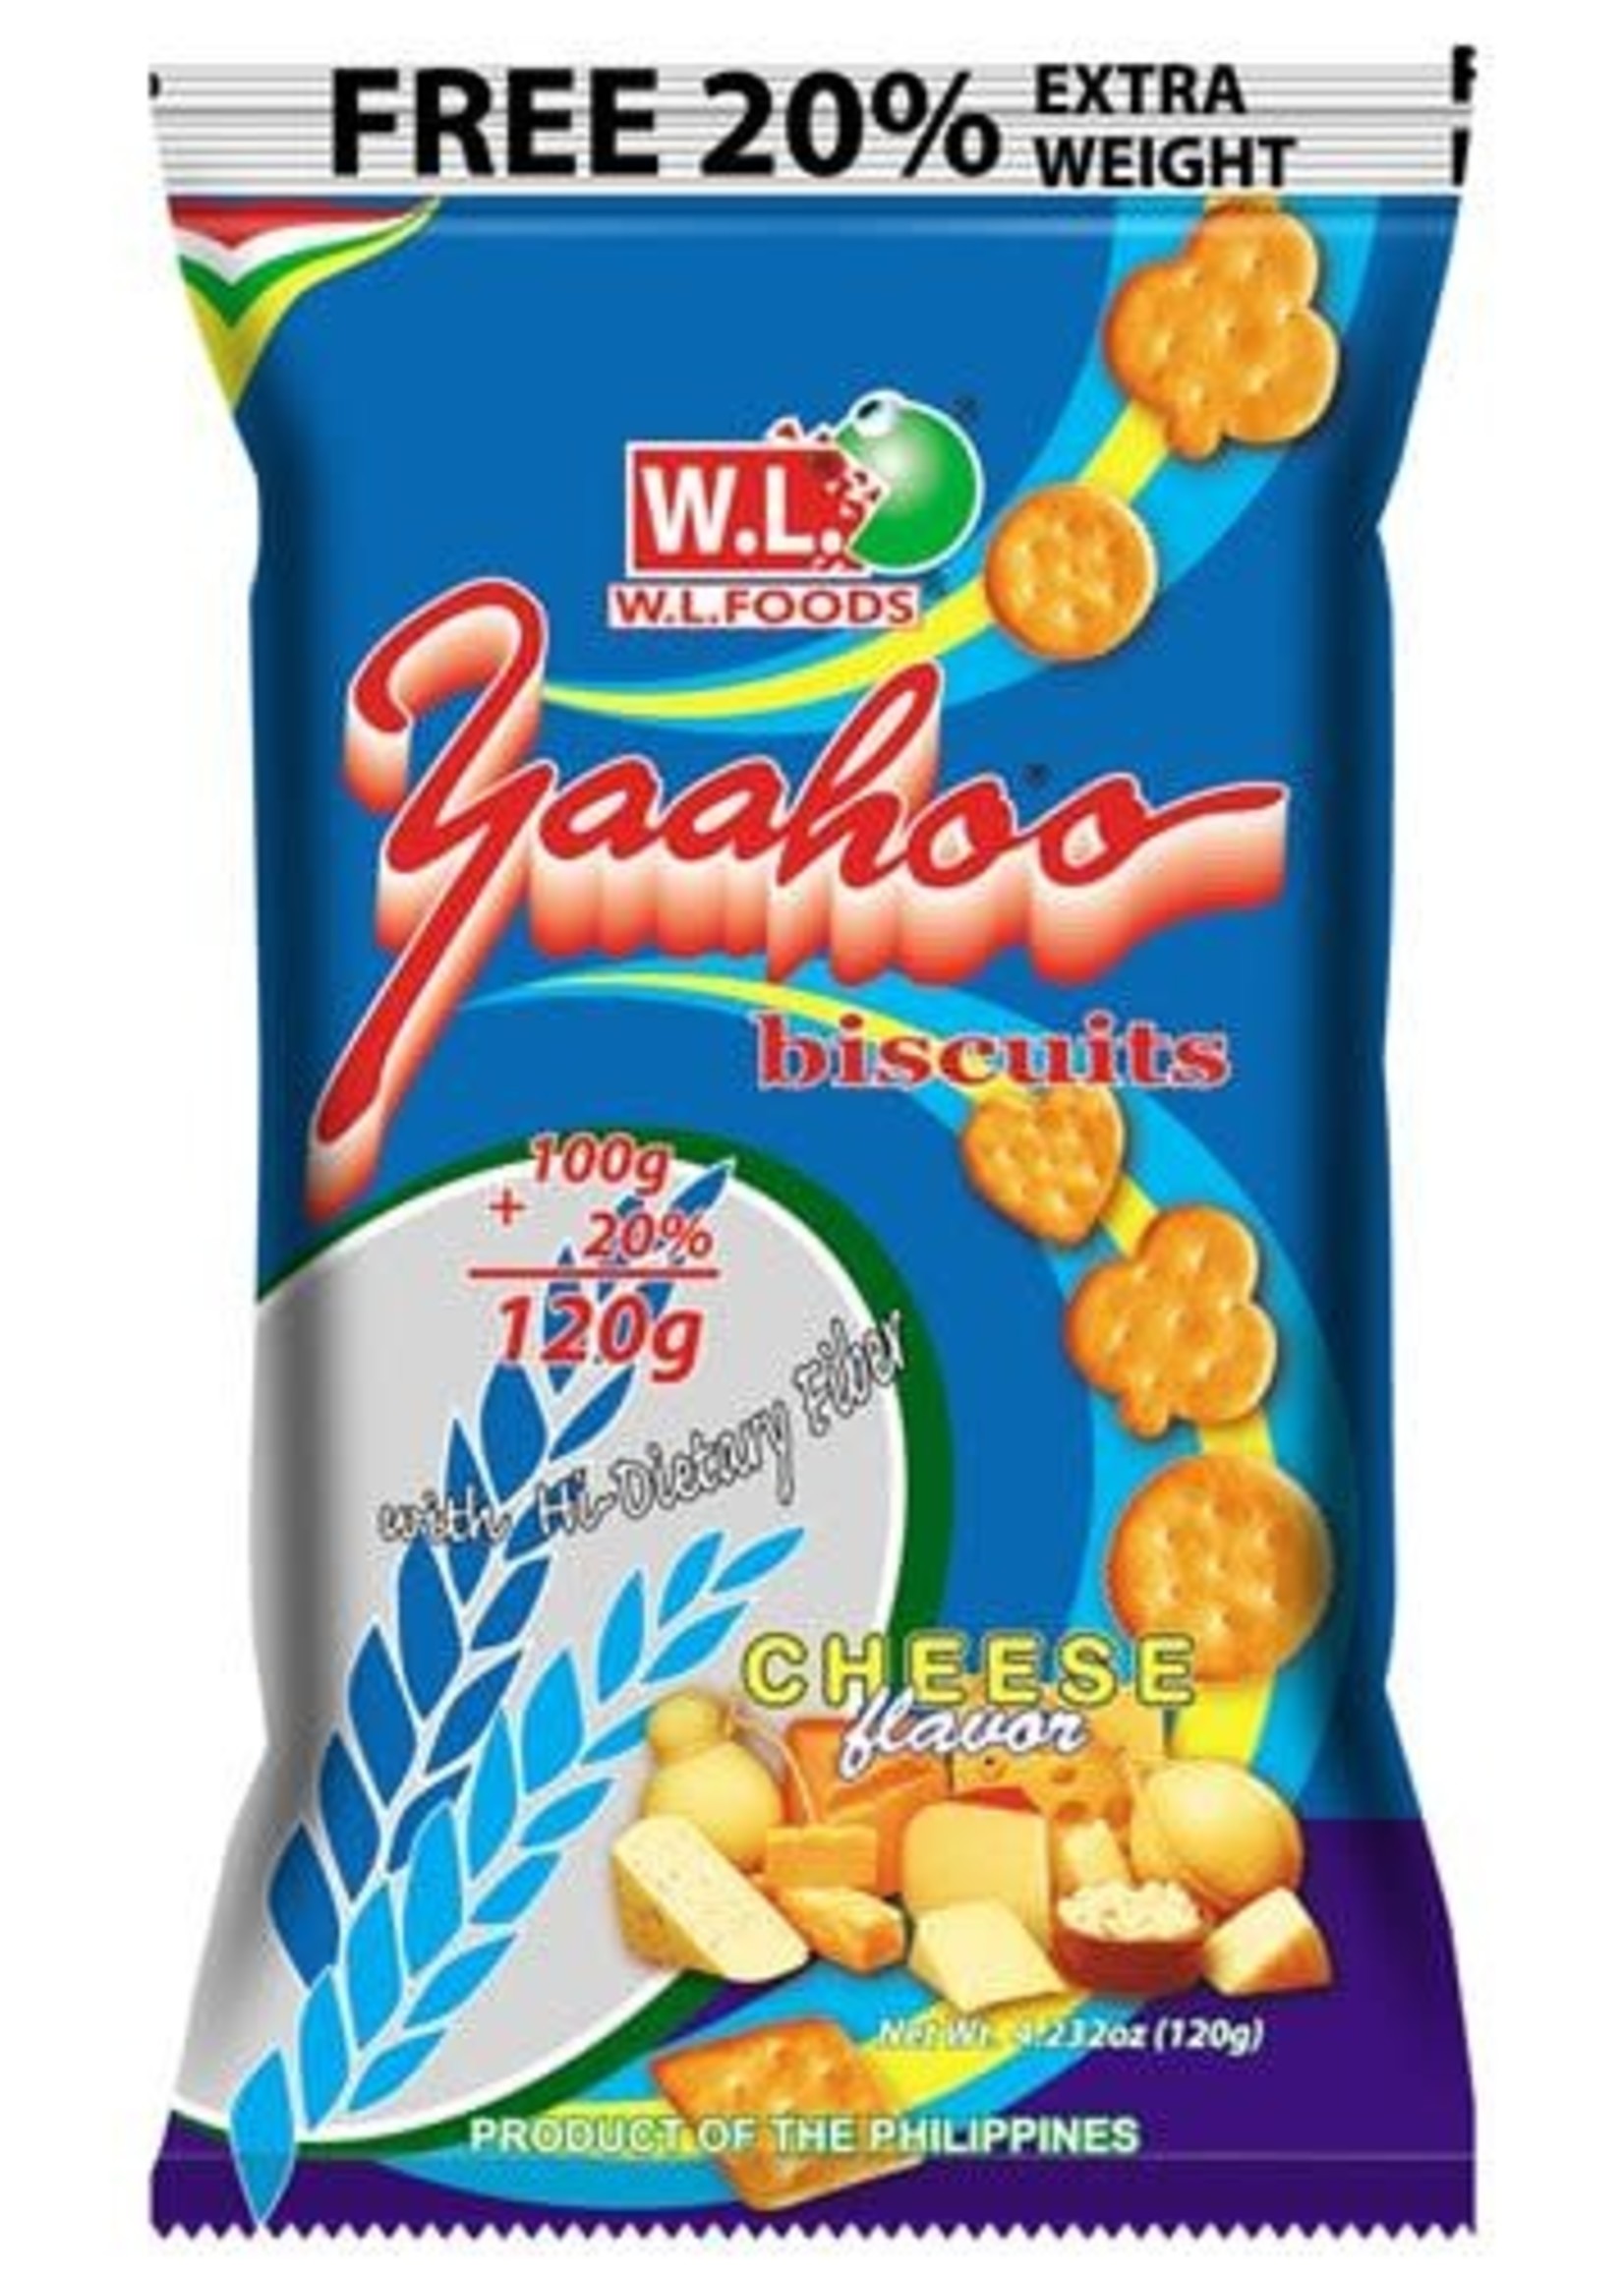 W.L. W.L. Yahoo biscuits Cheese flavor 120g